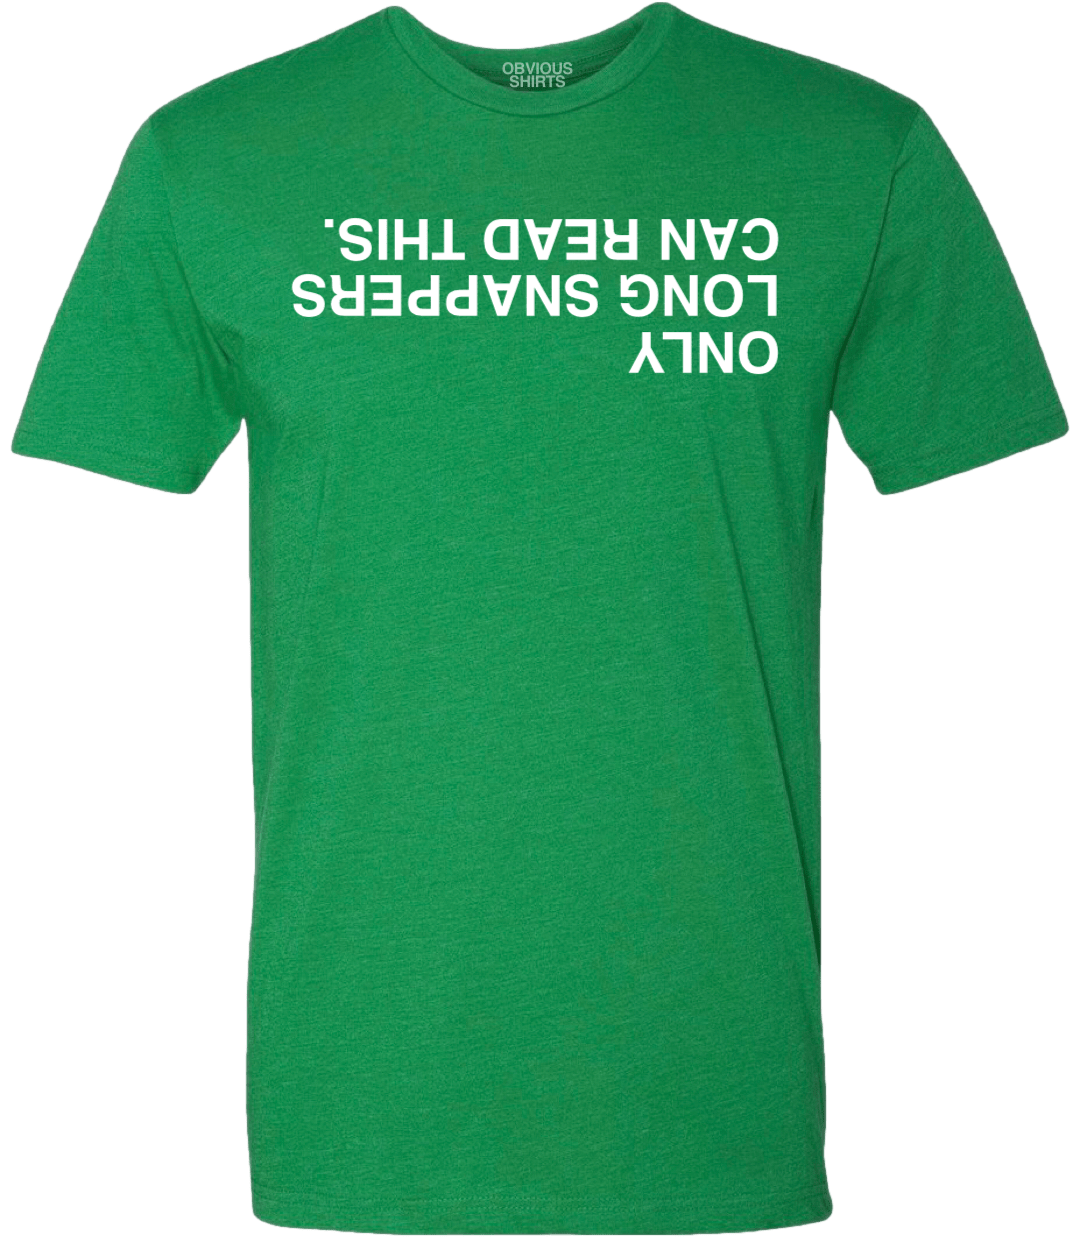 ONLY LONG SNAPPERS CAN READ THIS. (GREEN) - OBVIOUS SHIRTS